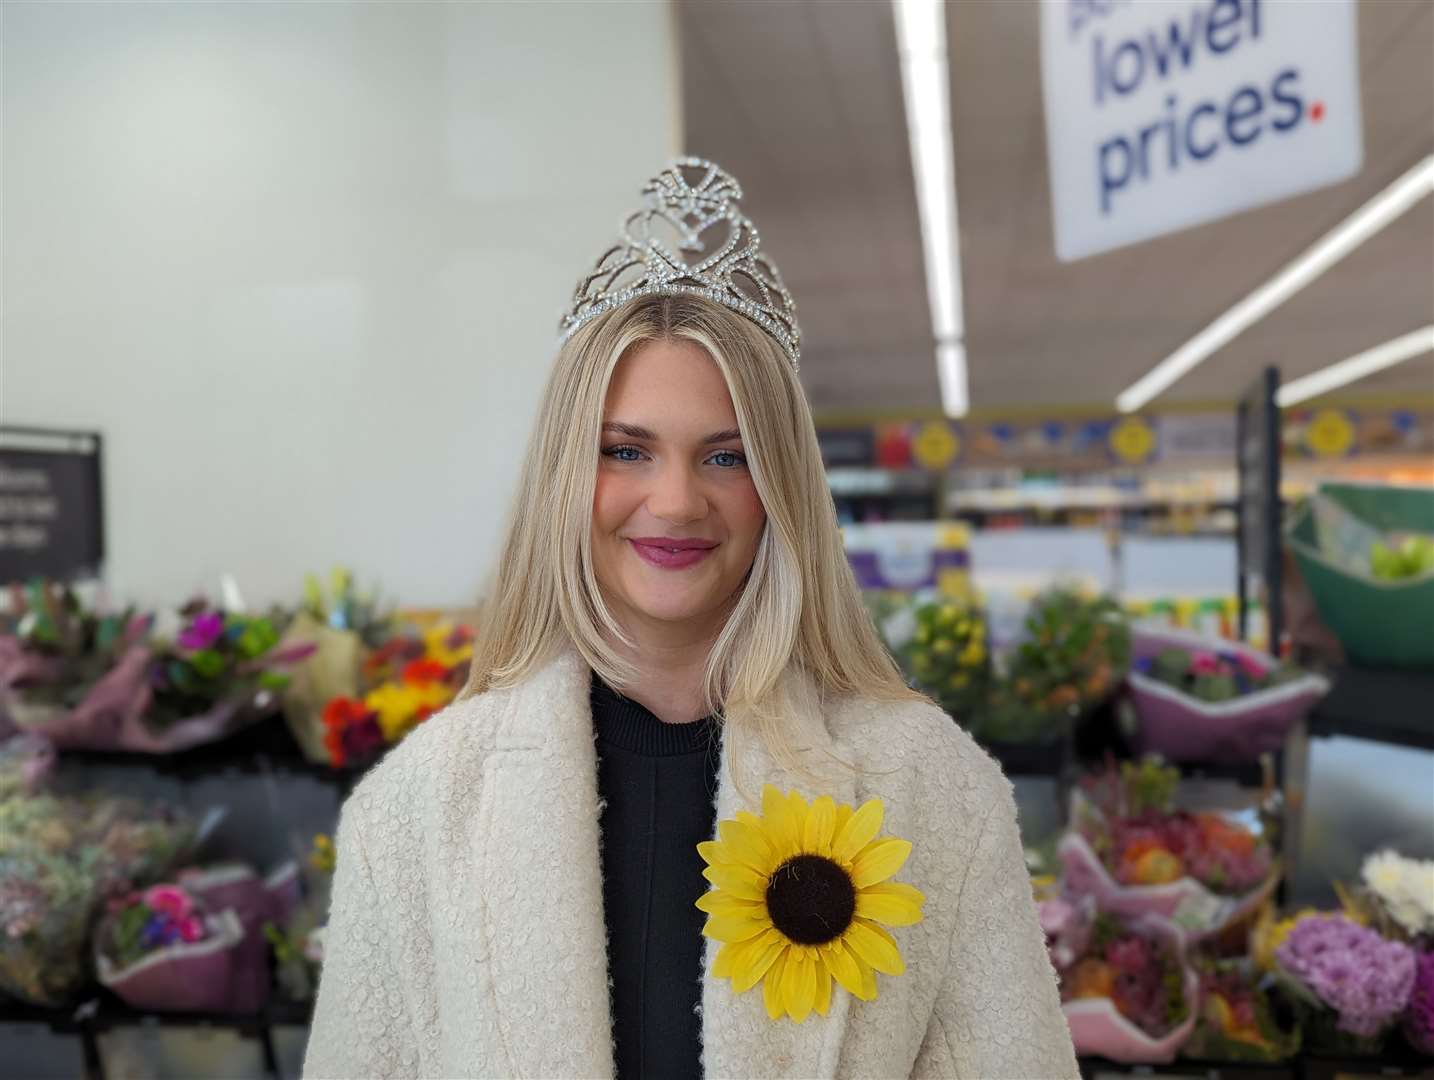 Miss Scotland raises funds for the Highland Hospice at Inshes Retail Park